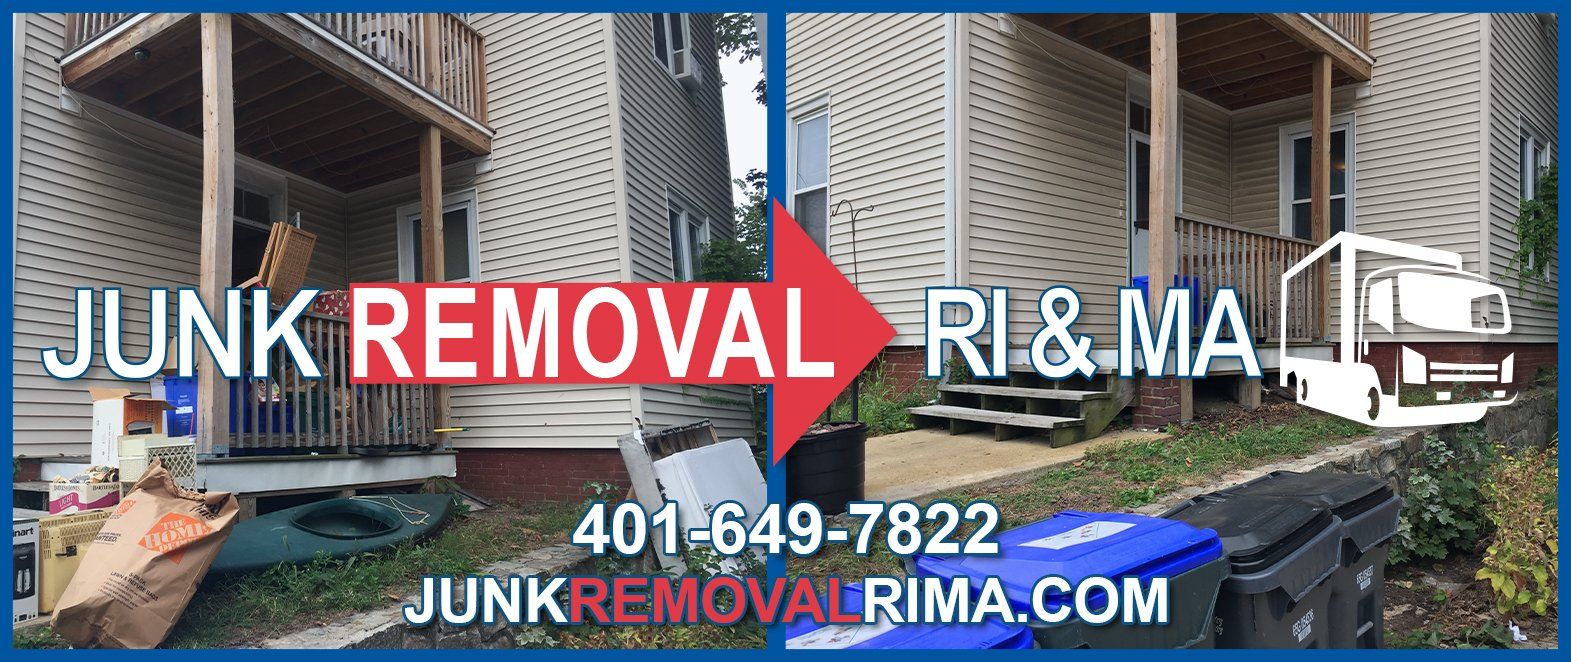 Estate Clean Out project done by Trash Removal RI